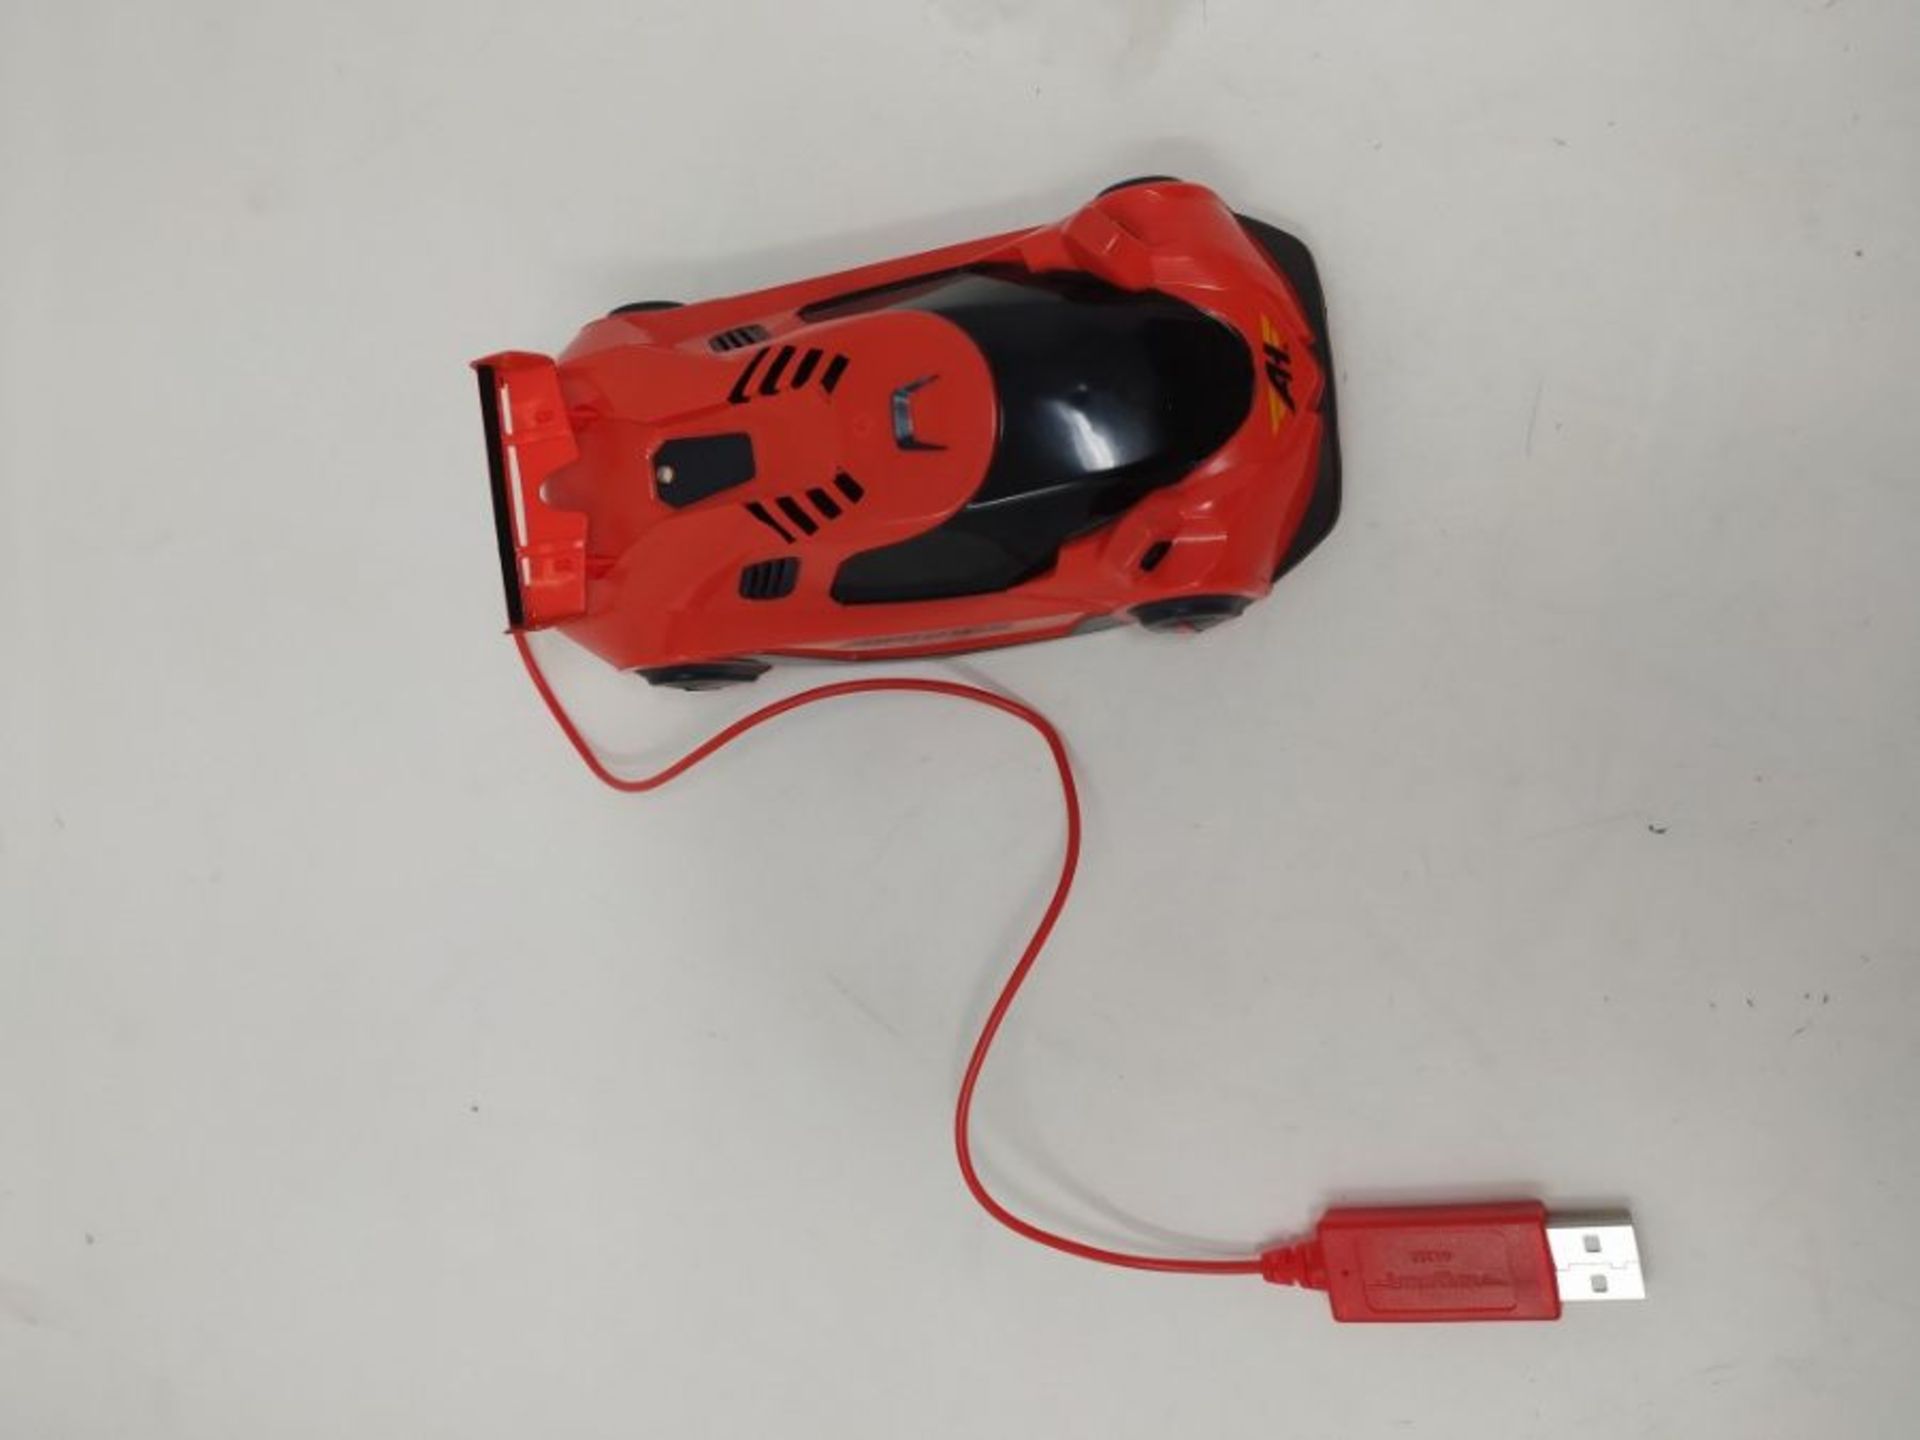 Air Hogs Zero Gravity Laser, Laser-Guided Real Wall-Climbing Race Car, Red - Image 2 of 2